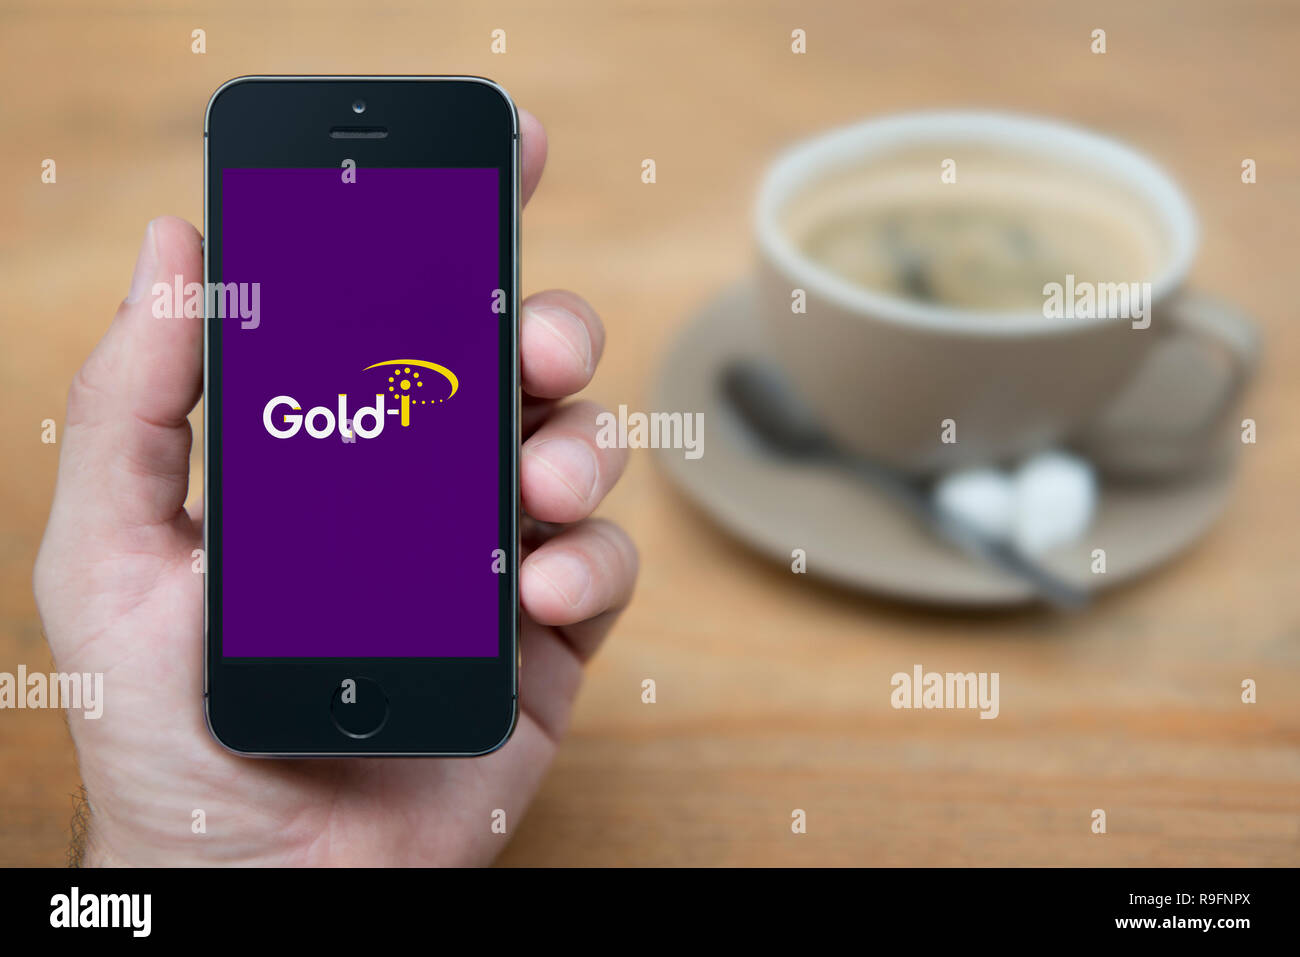 A man looks at his iPhone which displays the Gold-i logo (Editorial use only). Stock Photo